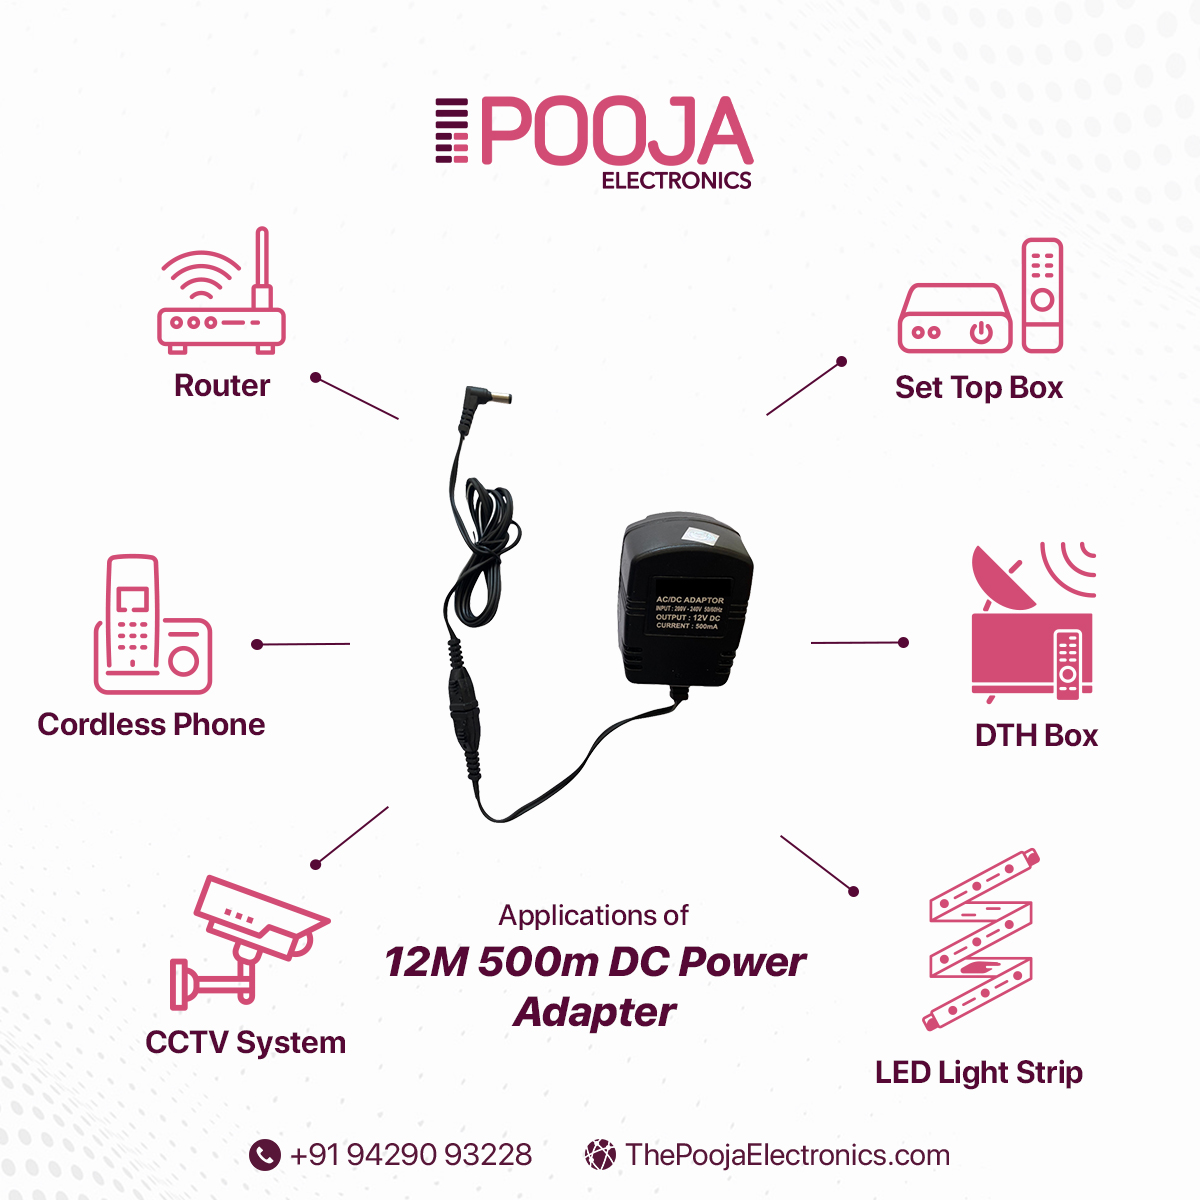 Never compromise on power with our dependable 12V 500mA DC Power Adapter from Pooja Electronics. Designed for maximum reliability and performance, it's the ultimate charging solution for your devices. ⚡🔌
.
#poojaelectronics #PowerYourLife #EfficientCharging #PremiumQuality